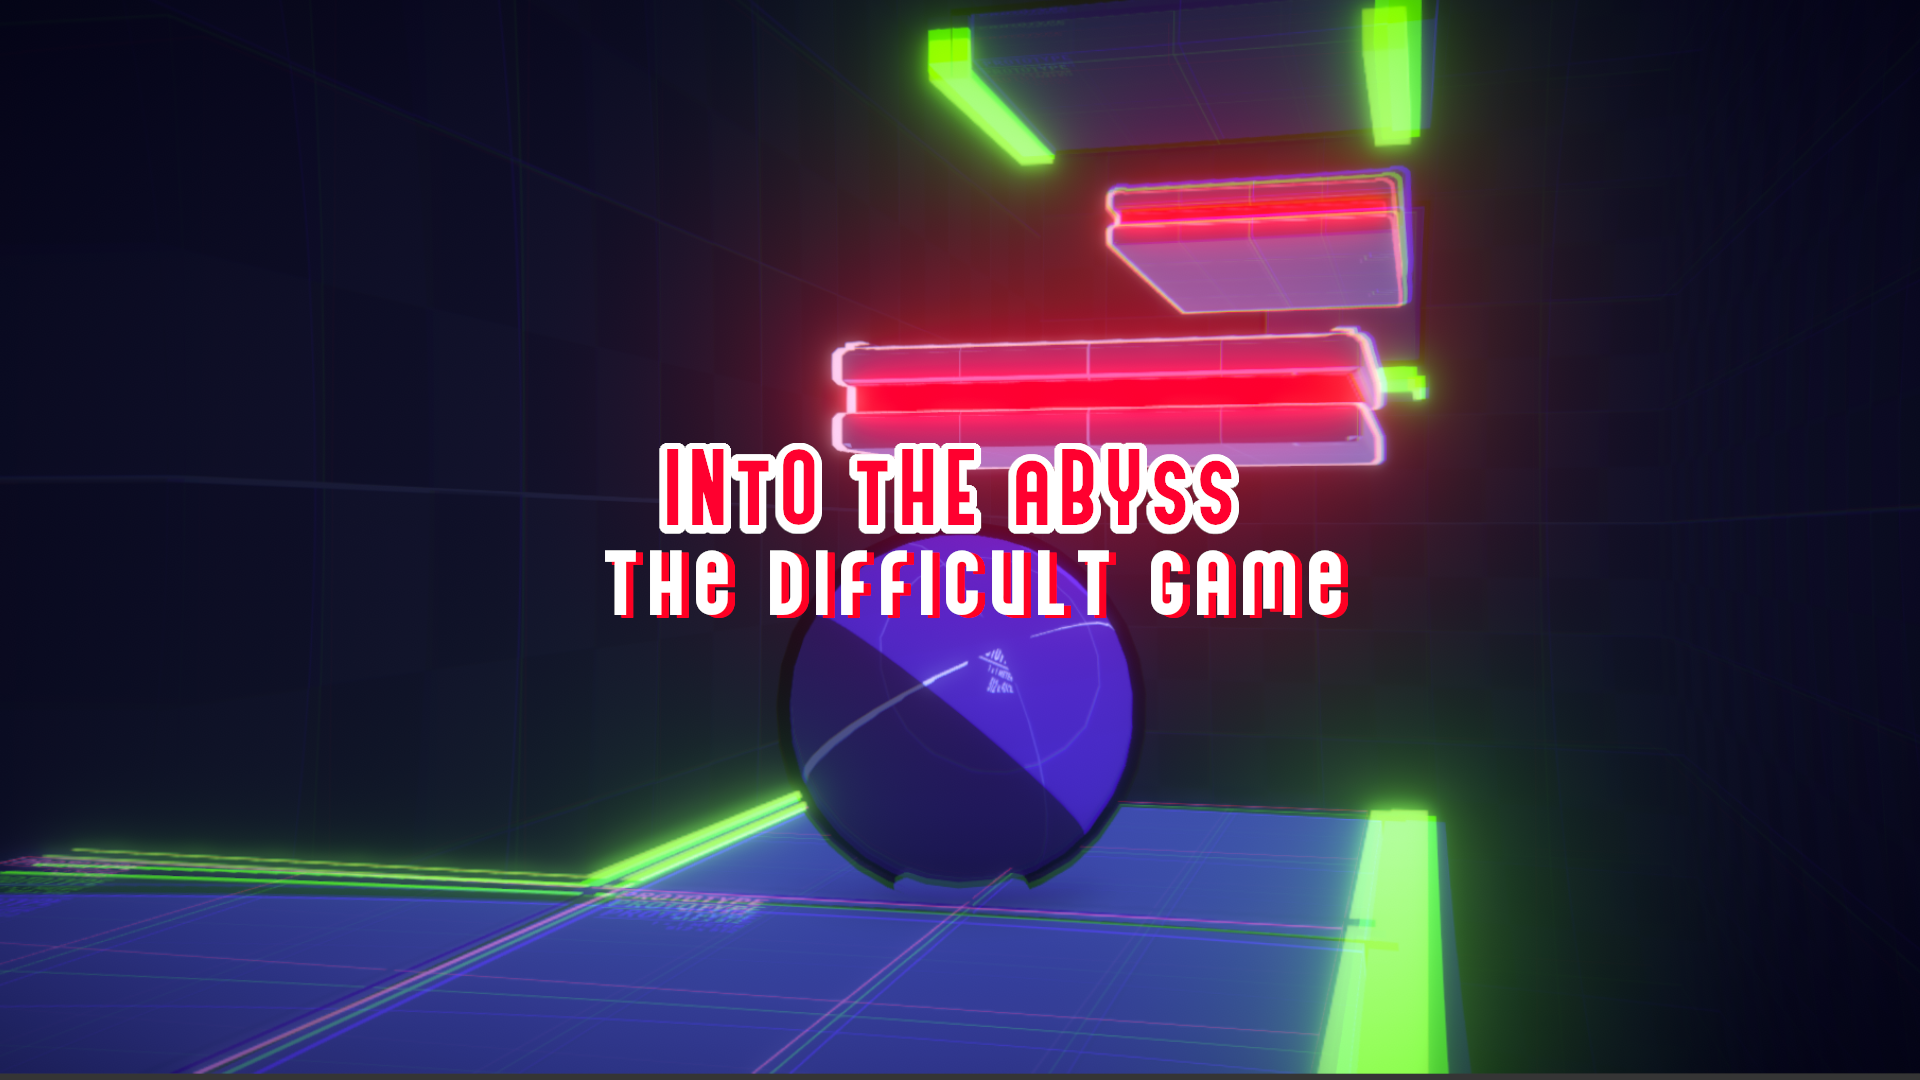 INTO THE ABYSS the difficult game